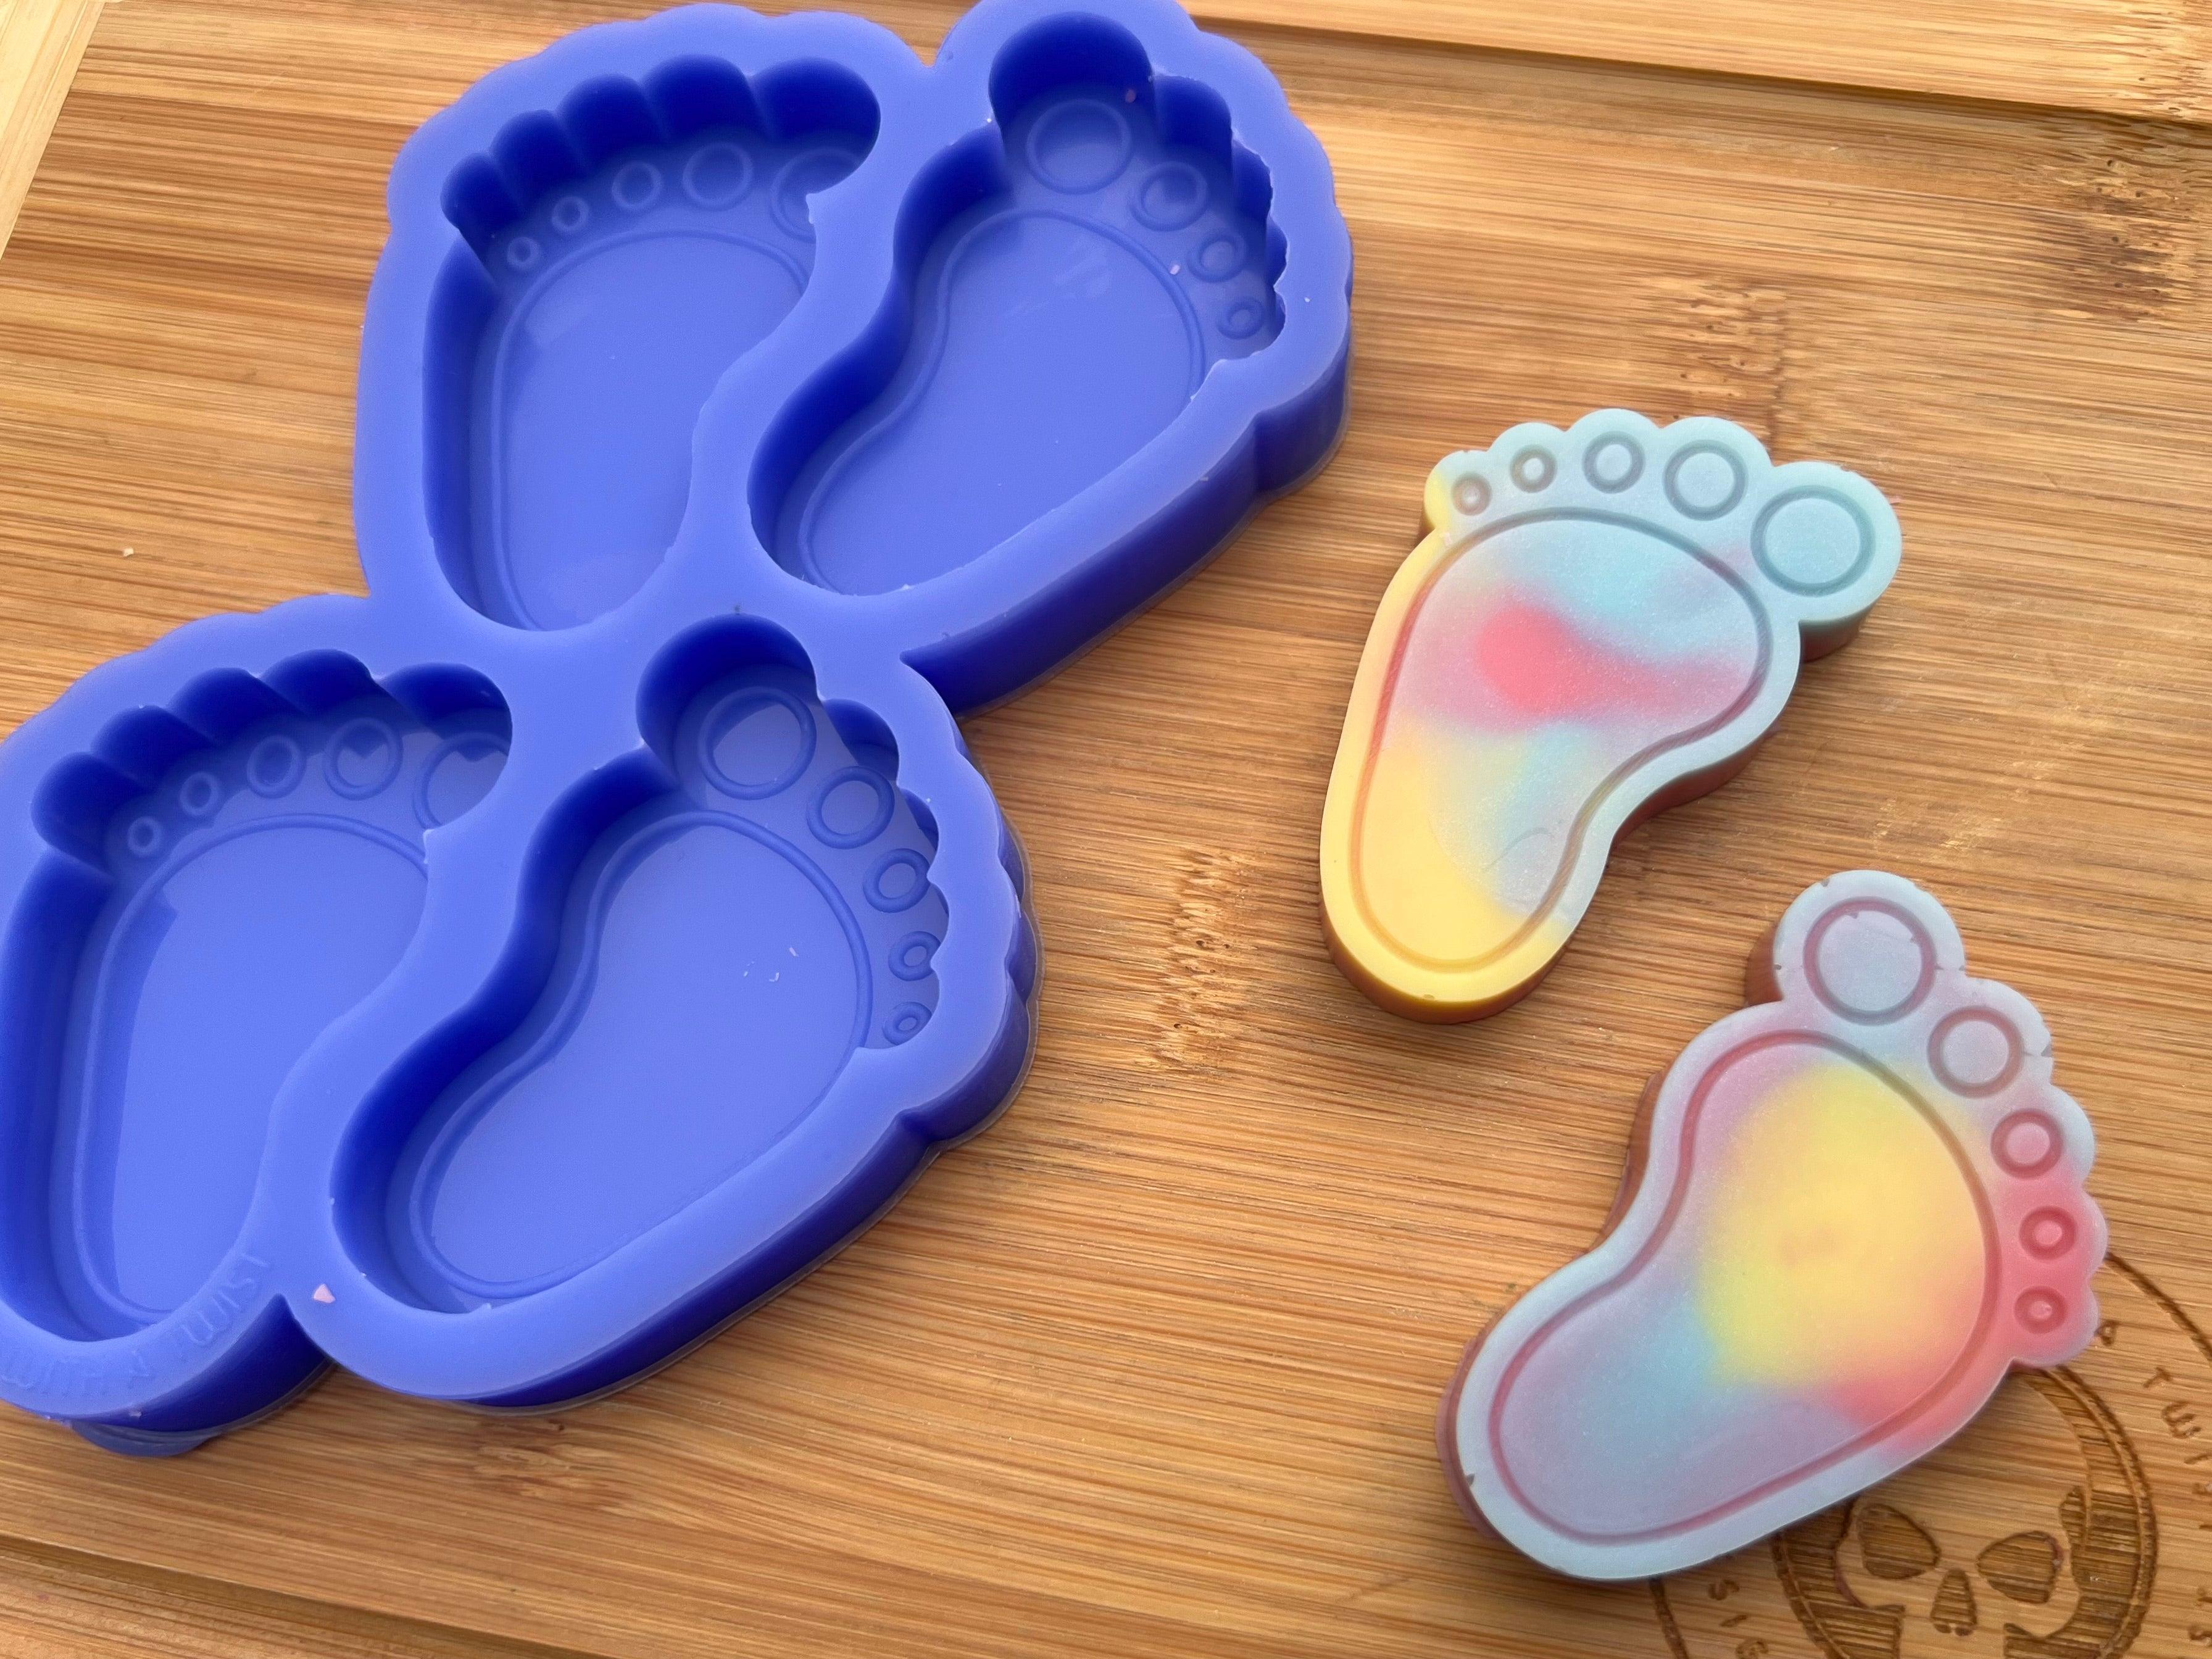 Baby Foot Print Wax Melt Silicone Mold - Designed with a Twist - Top quality silicone molds made in the UK.